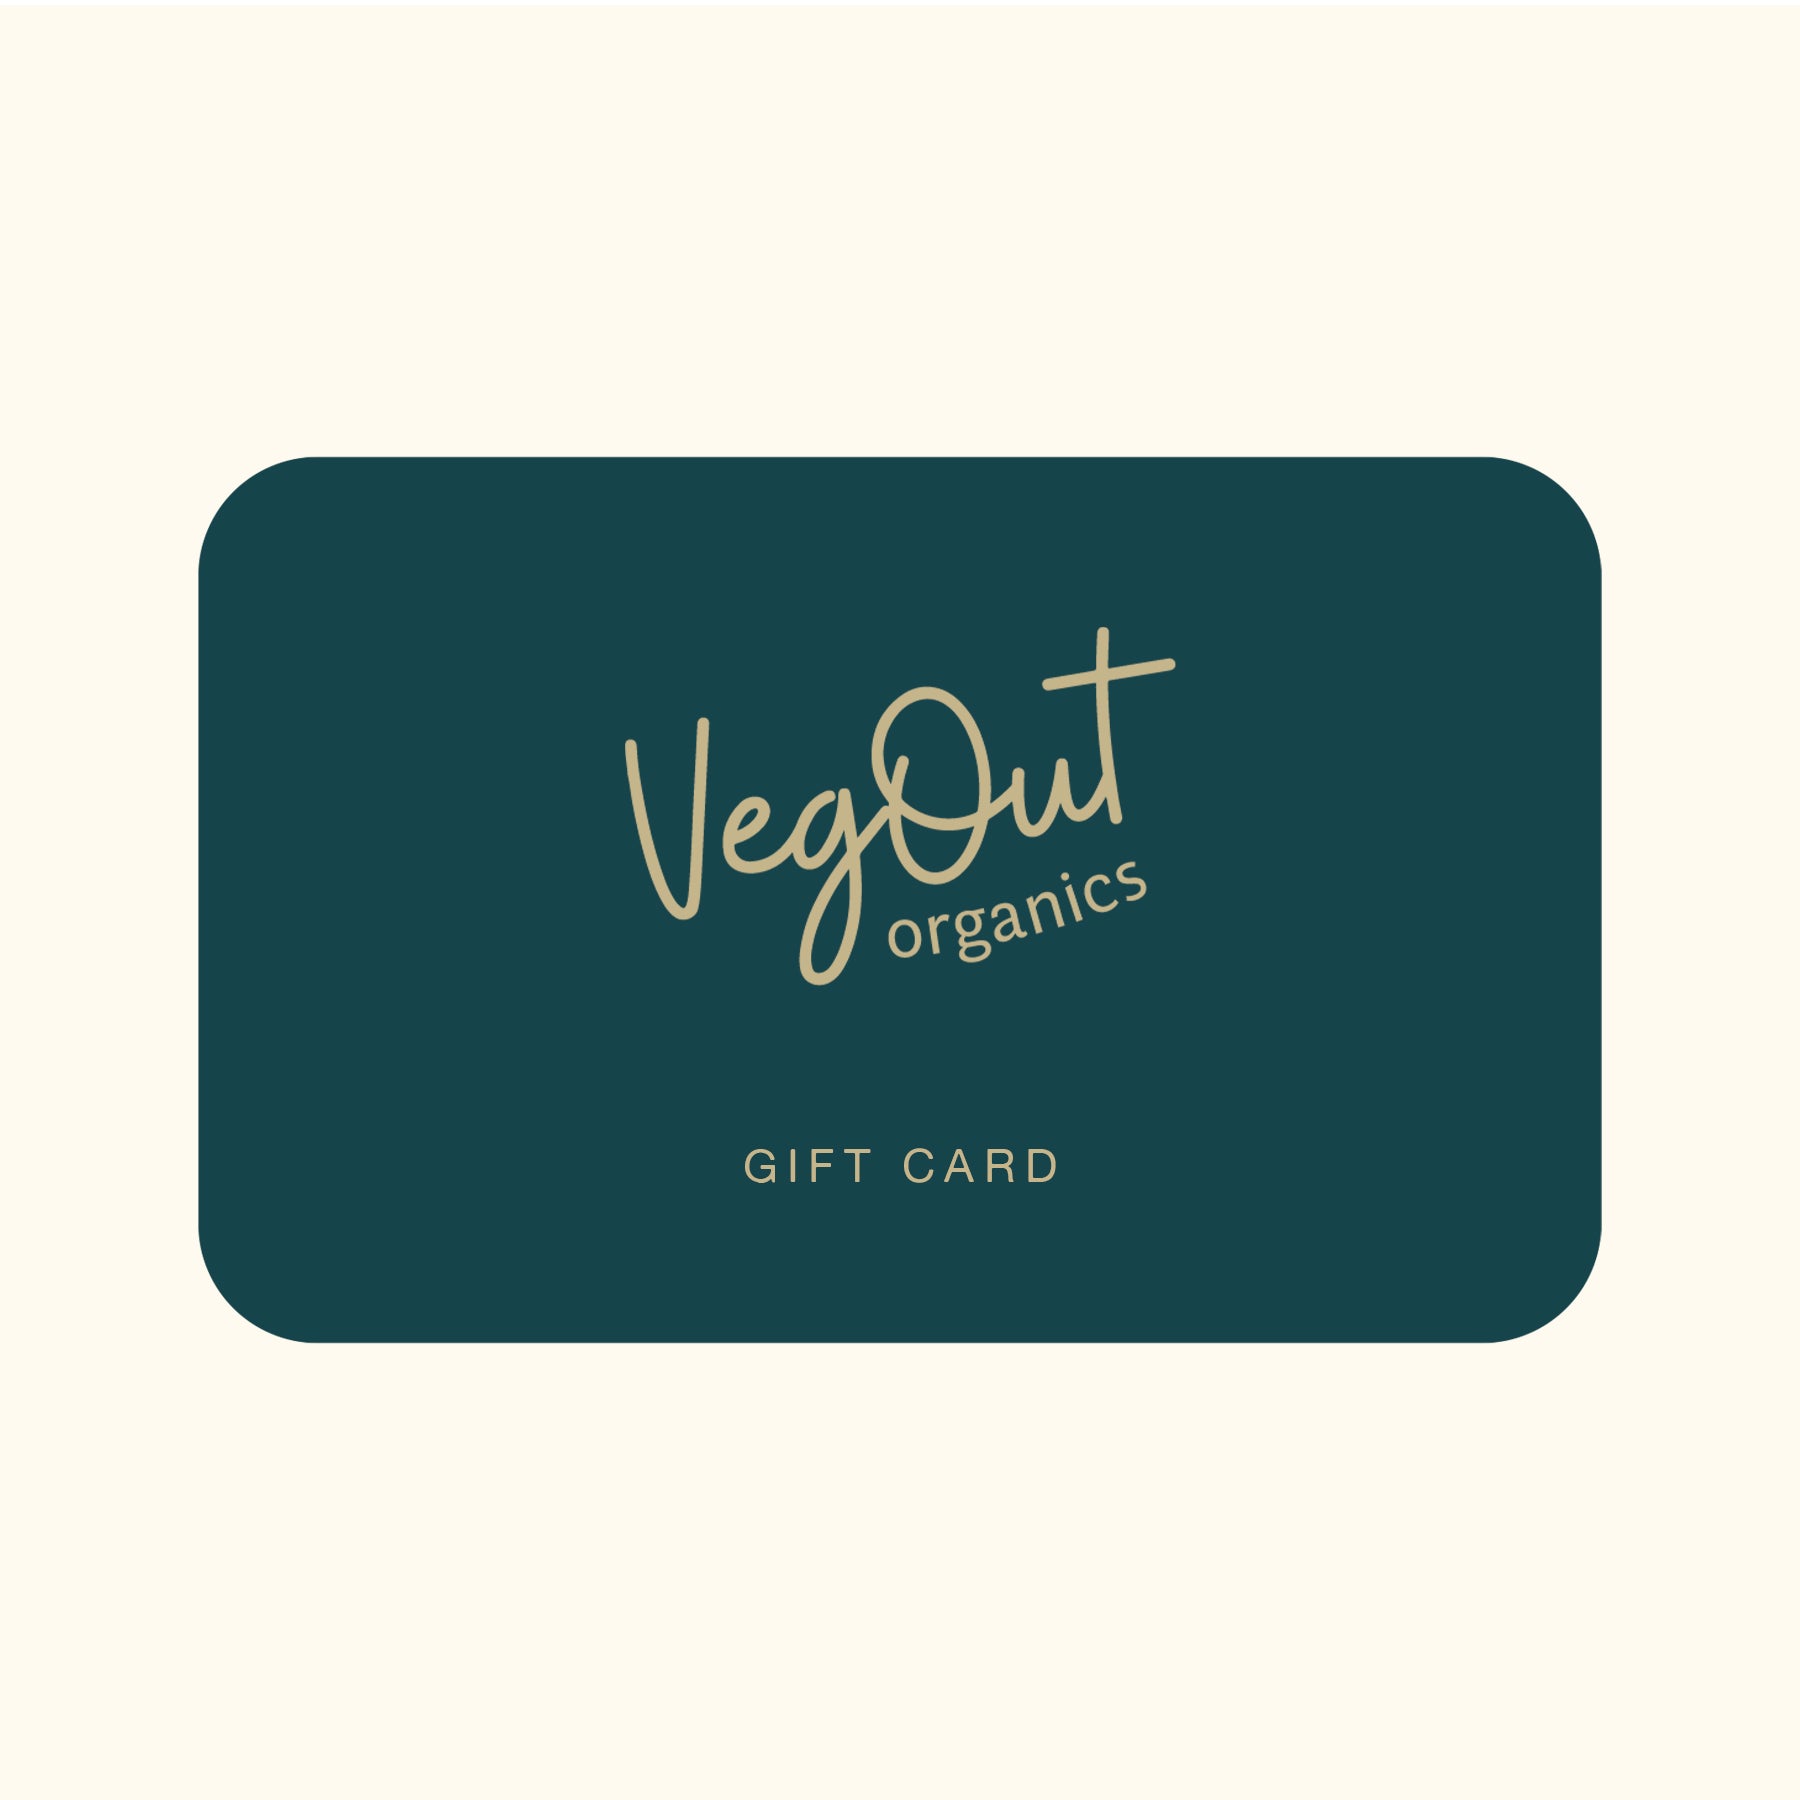 Veg Out gift cards